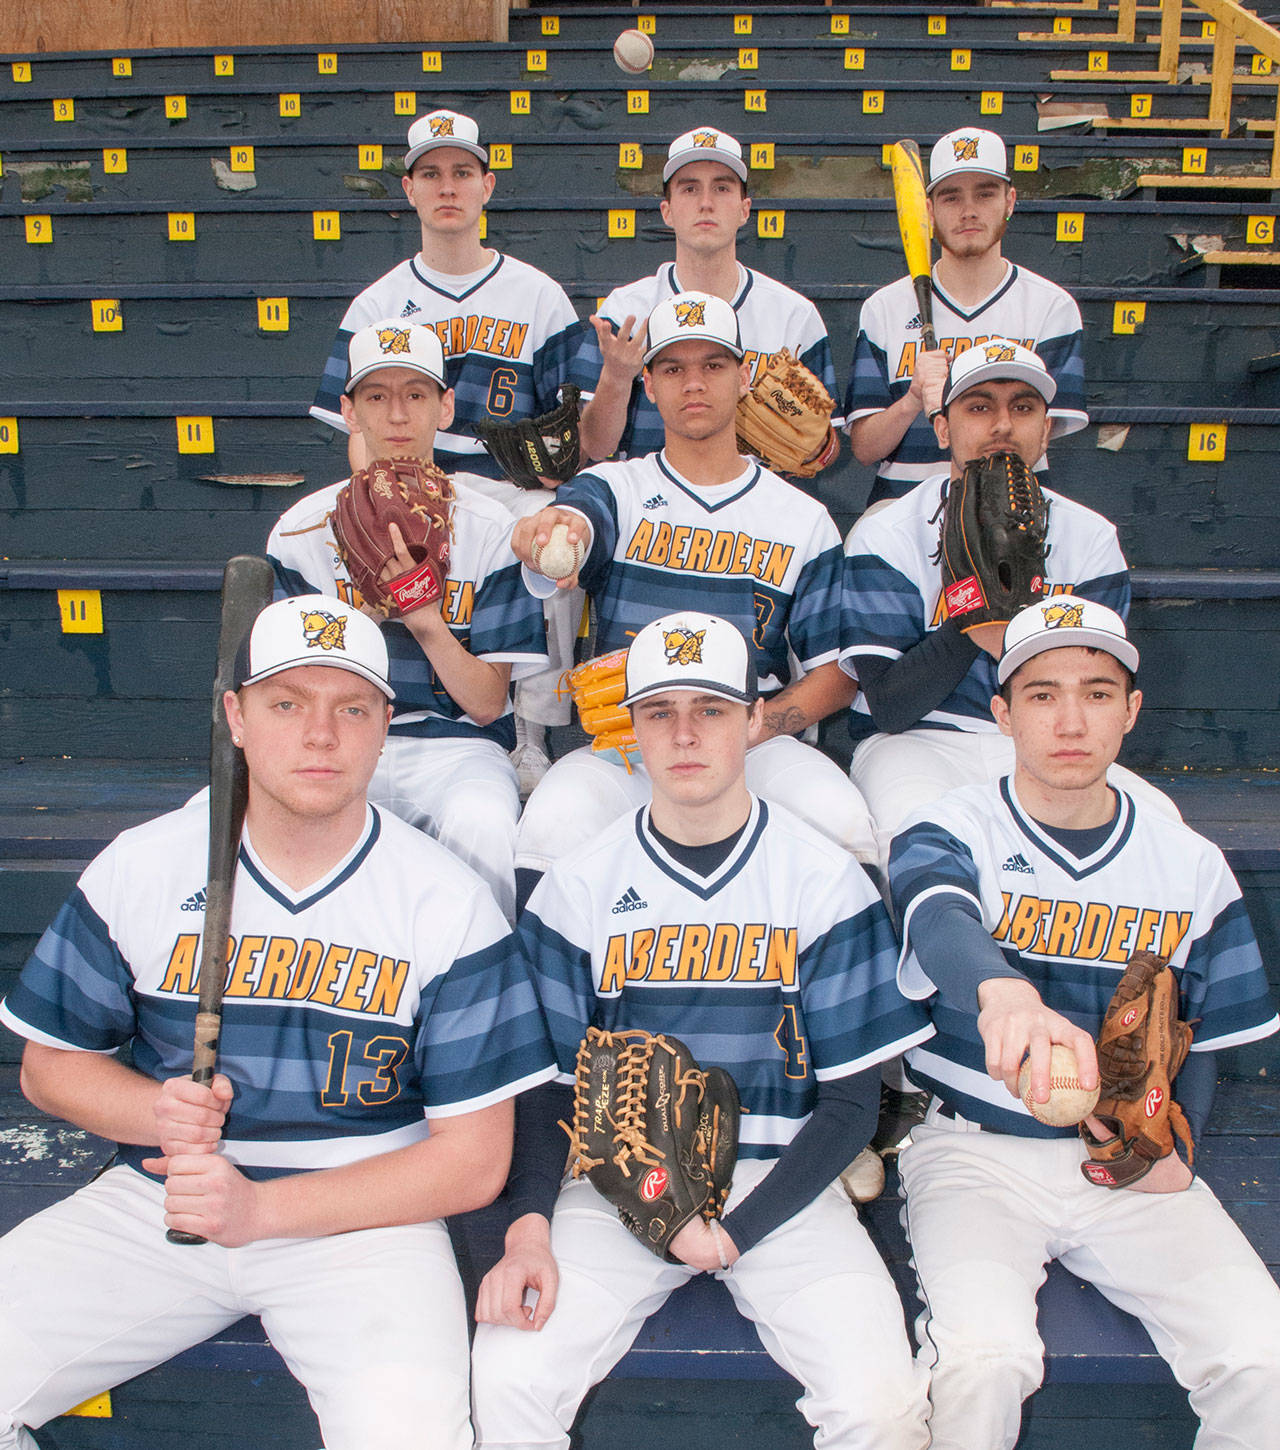 (Brendan Carl | The Daily World) Aberdeen will bring back nine seniors who have been teammates for as long as they can remember for one last season of baseball. The Bobcats are aiming for a postseason run, led by (top, from left) Brayden Roiko, Grant Larson, C.J. Oldham, (middle) Austin Lawrence, Josh Collett, Milan Jandu (bottom) Jake Metke, Blake Swenson and Brian Fuchser.